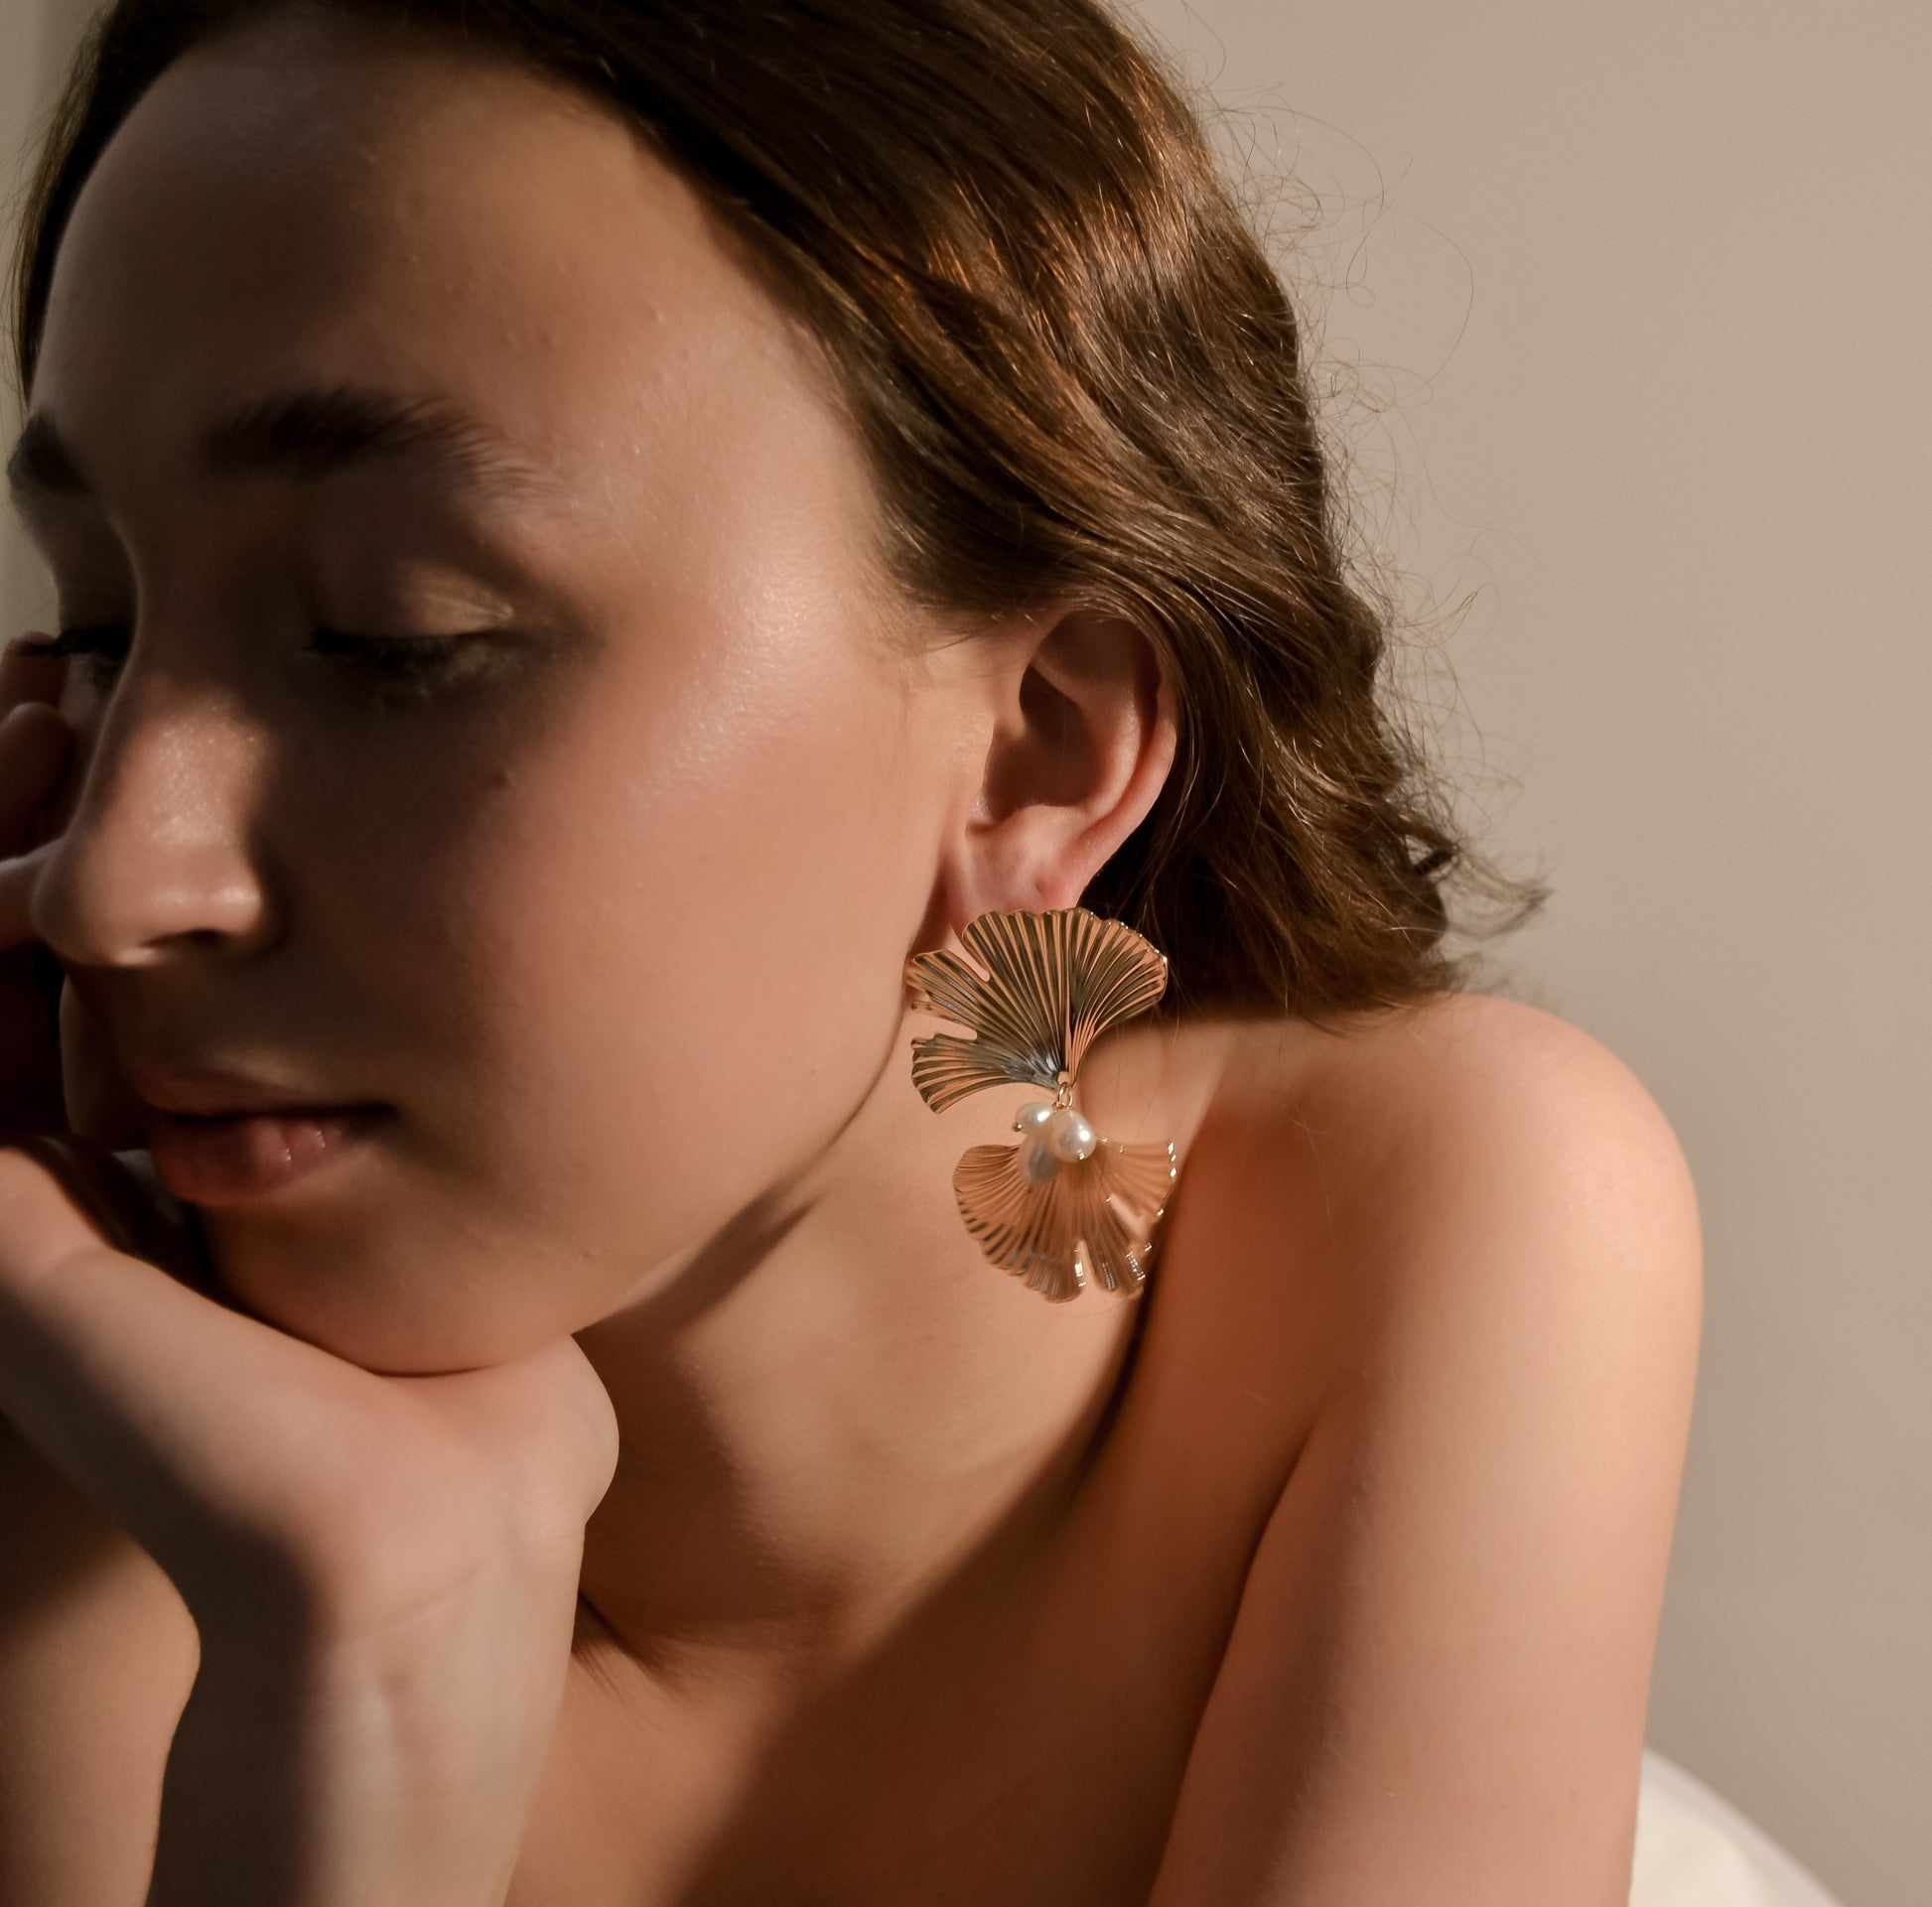 A person showcases a large, statement earring with a floral design